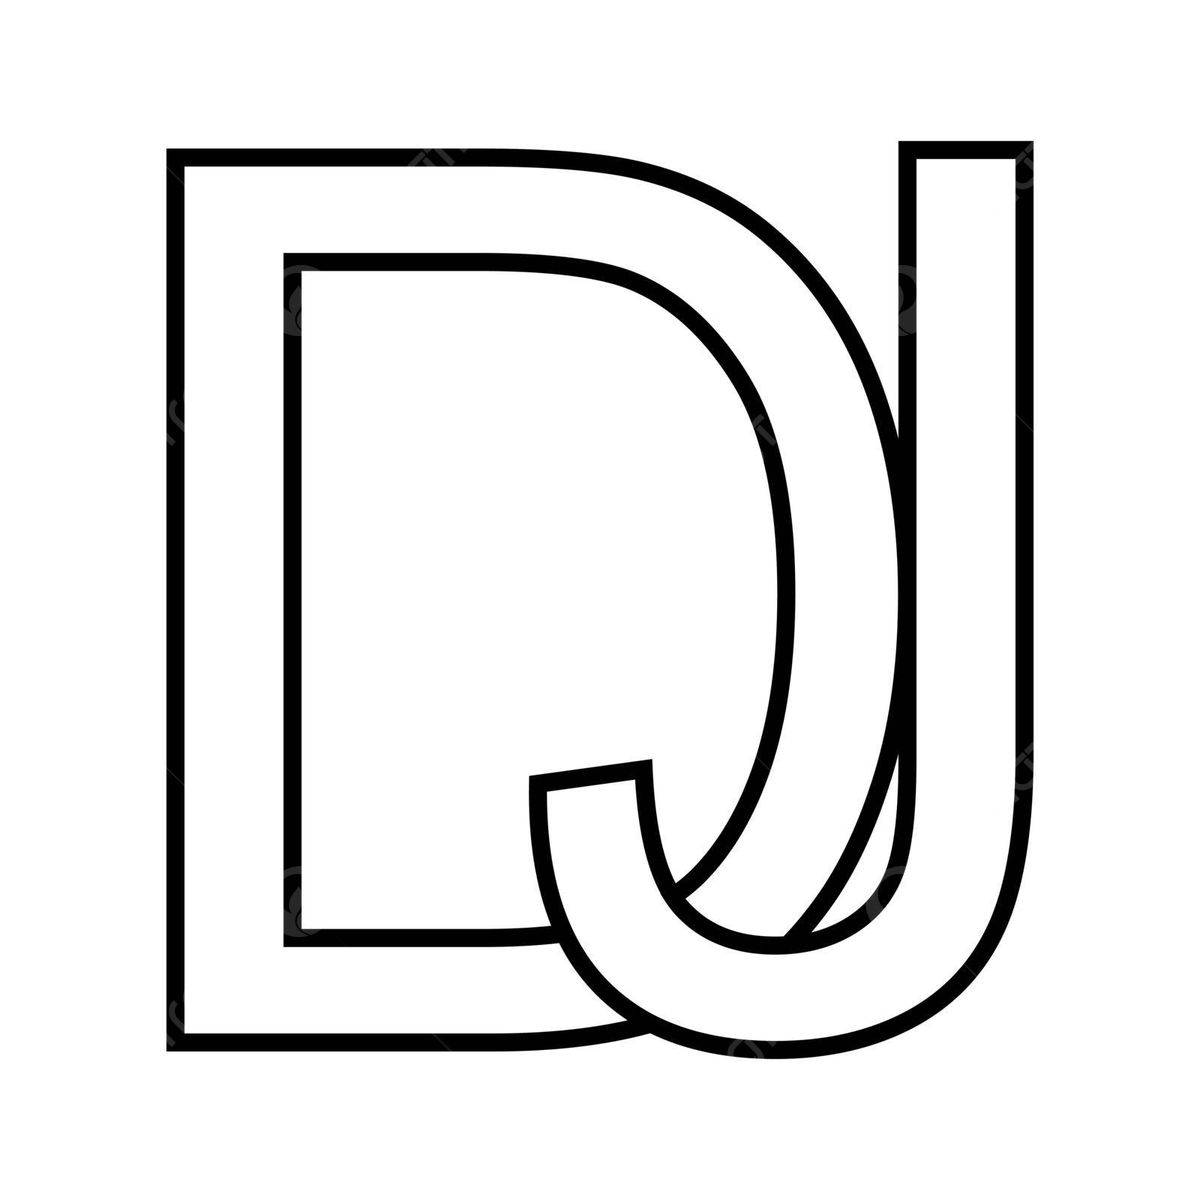 Iconic dj jd logo interlaced letters d and j in a sign vector black dj industry png and vector with transparent background for free download